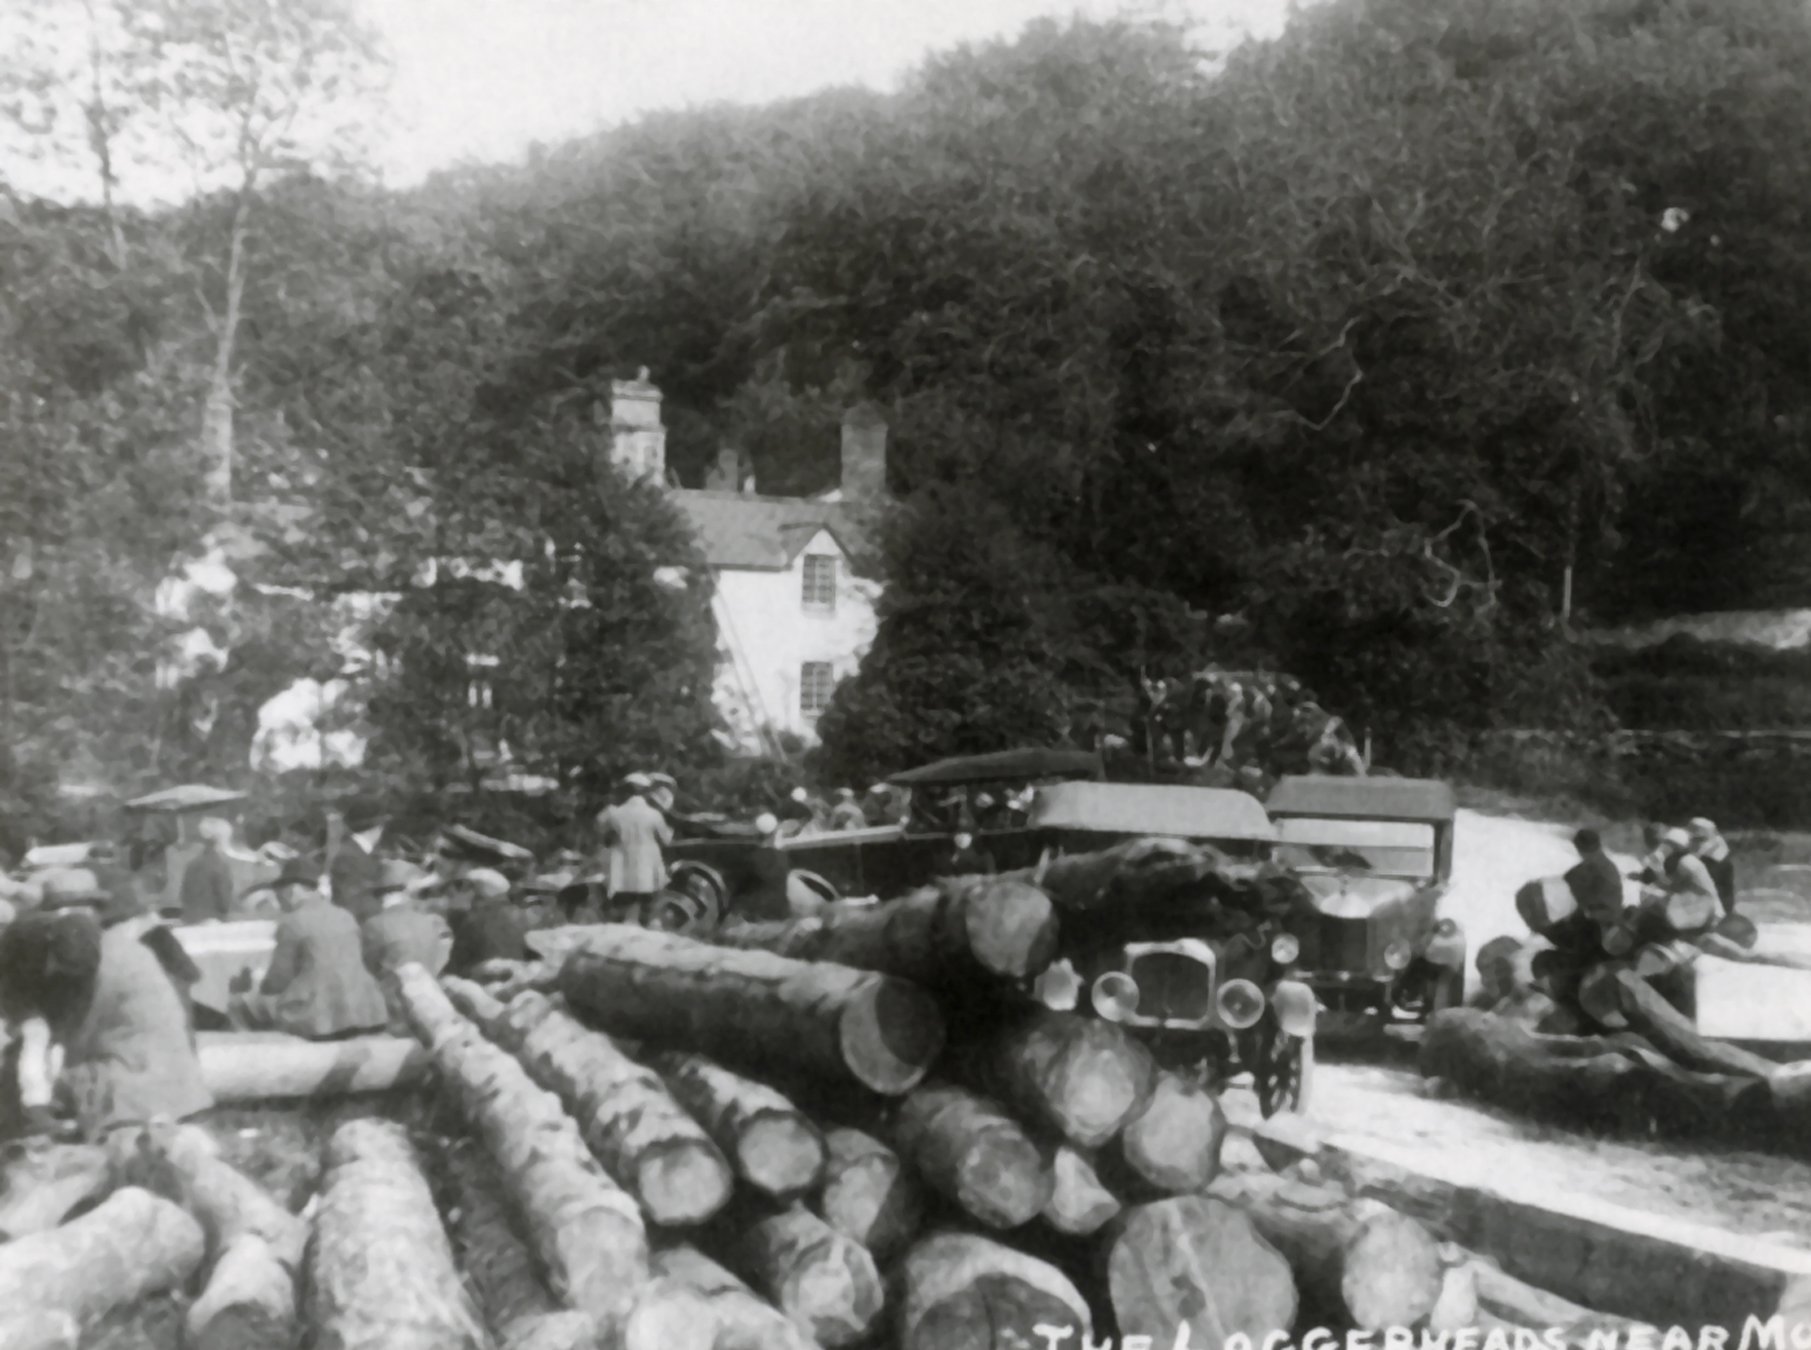 The Mill at Loggerheads in the early 1900s.